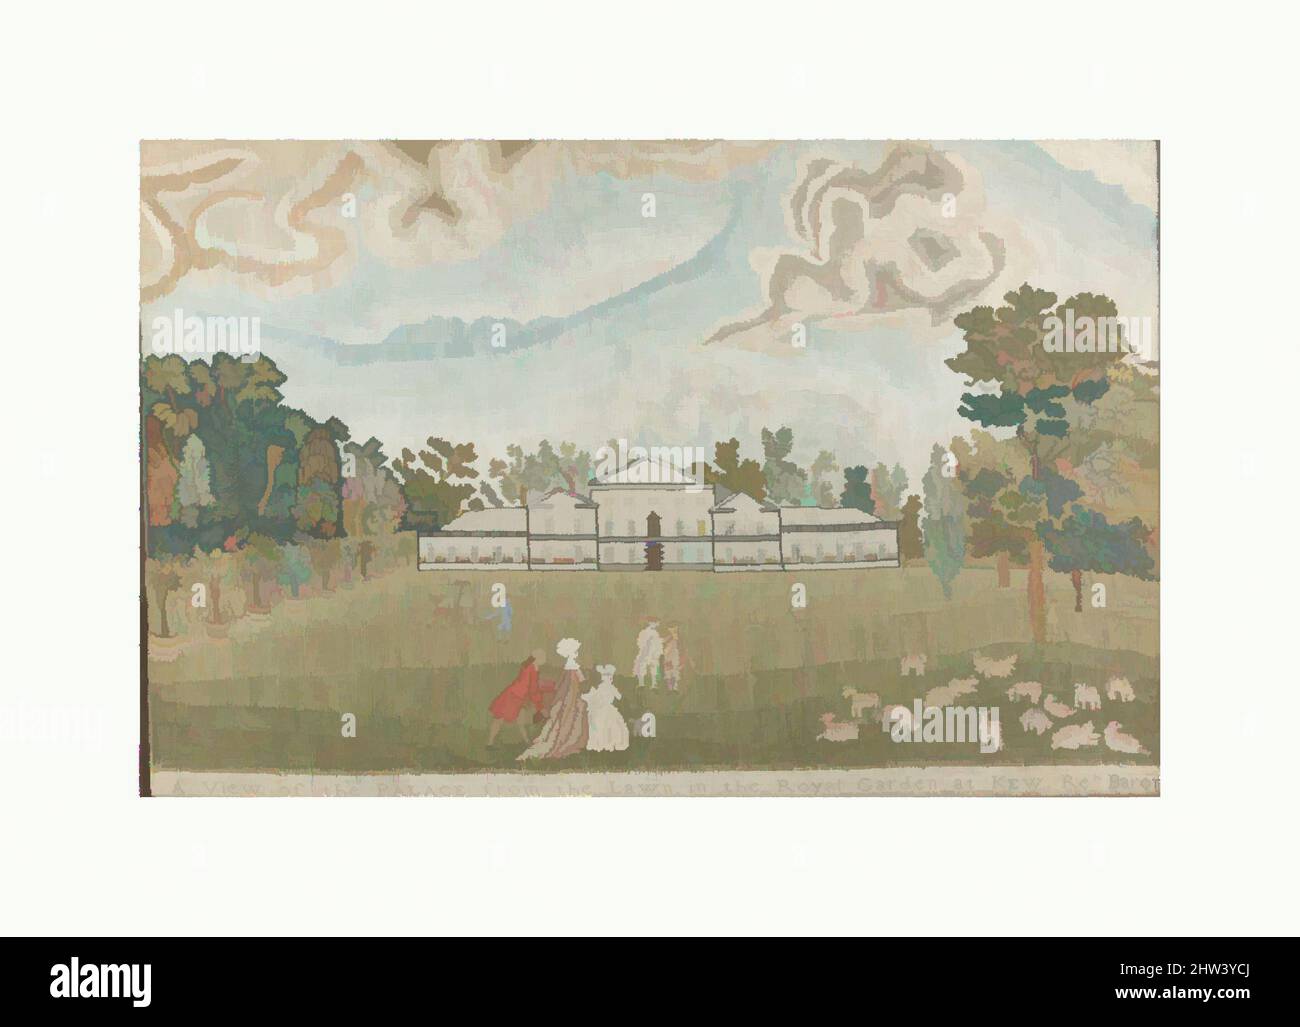 Art inspired by A View of the Palace from the Lawn in the Royal Garden at Kew, third quarter 18th century, British, Silk, wool on canvas, H. 11 3/4 x W. 17 1/2 inches (29.8 x 44.5 cm); Framed: H. 14 1/8 x W. 20 1/16 x D. 1 1 4 inches (36.8 x 50.8 cm x 3.2 cm), Textiles-Embroidered, Classic works modernized by Artotop with a splash of modernity. Shapes, color and value, eye-catching visual impact on art. Emotions through freedom of artworks in a contemporary way. A timeless message pursuing a wildly creative new direction. Artists turning to the digital medium and creating the Artotop NFT Stock Photo